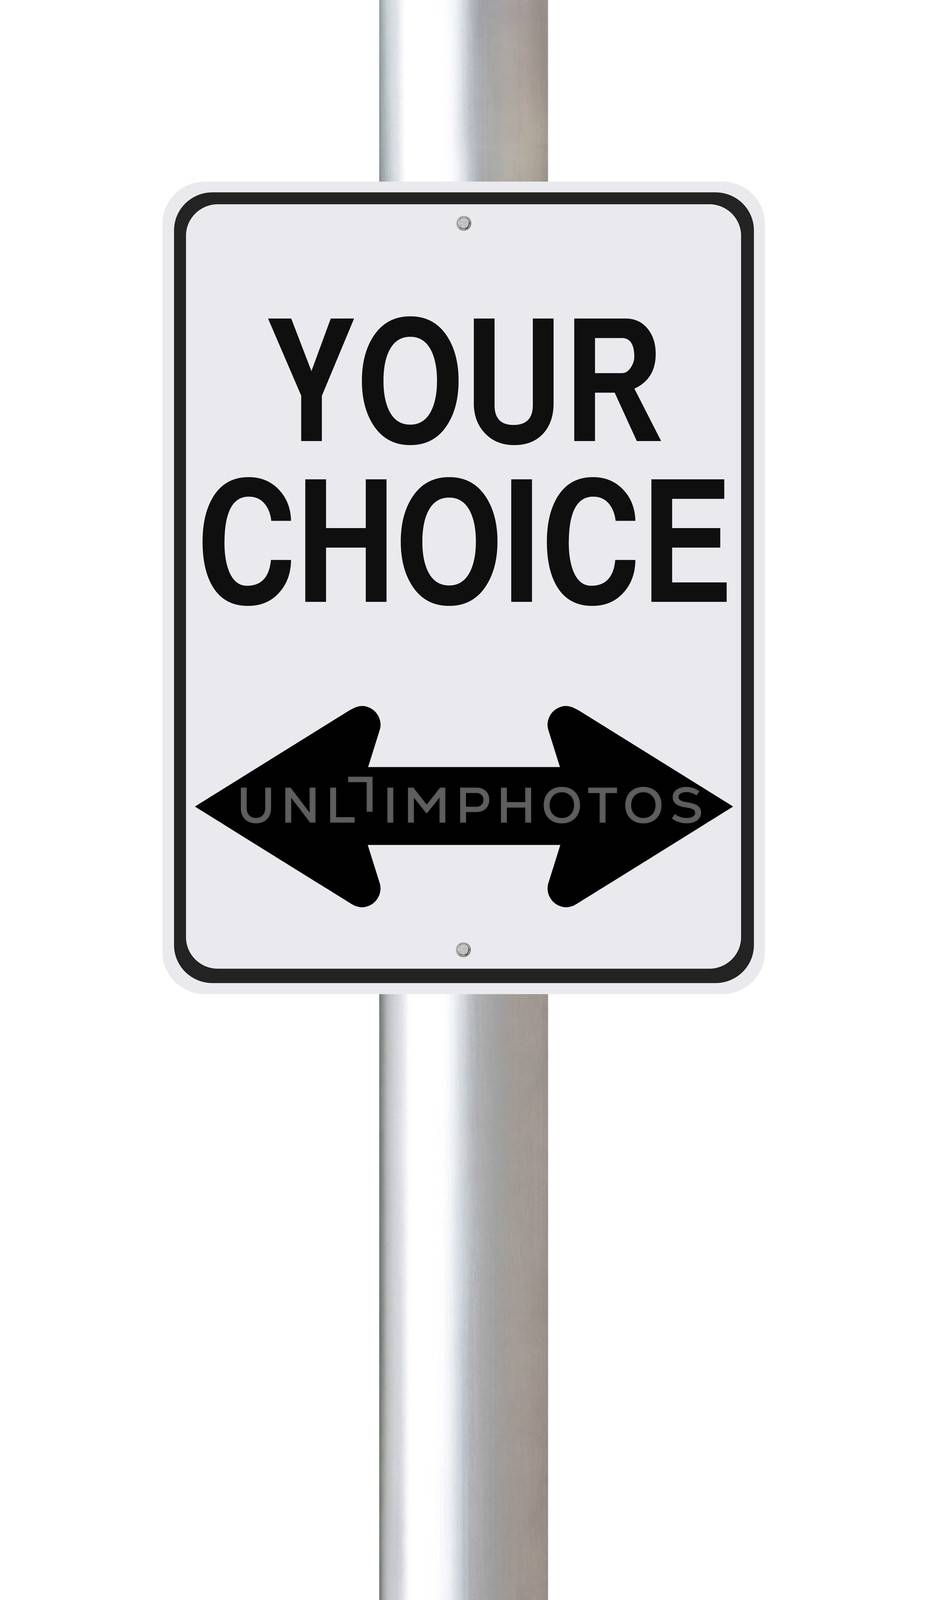 A modified one way street sign indicating Your Choice